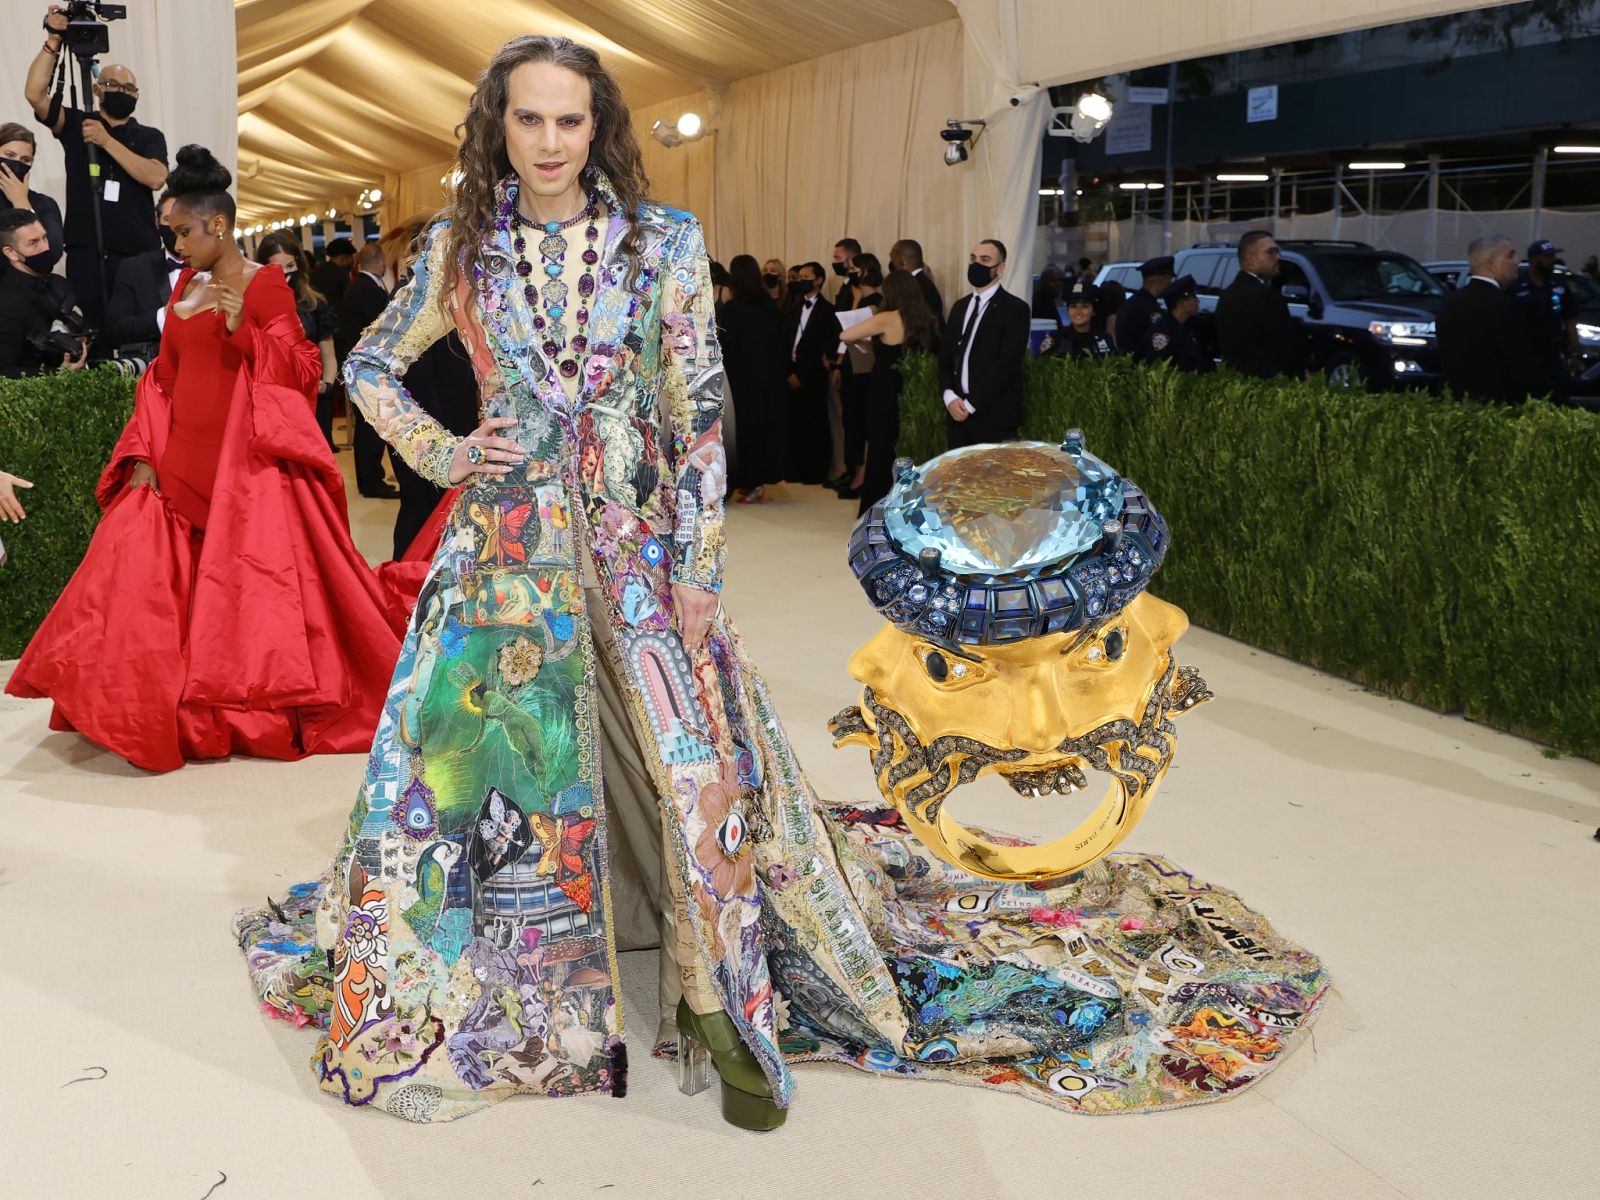 Jordan Roth wears the Lydia Courteille Caravan agate necklace and the matching 4 Faces Caravan ring, plus a Rene Boivin amethyst necklace from A La Vieille Russie, to the Met Gala 2021